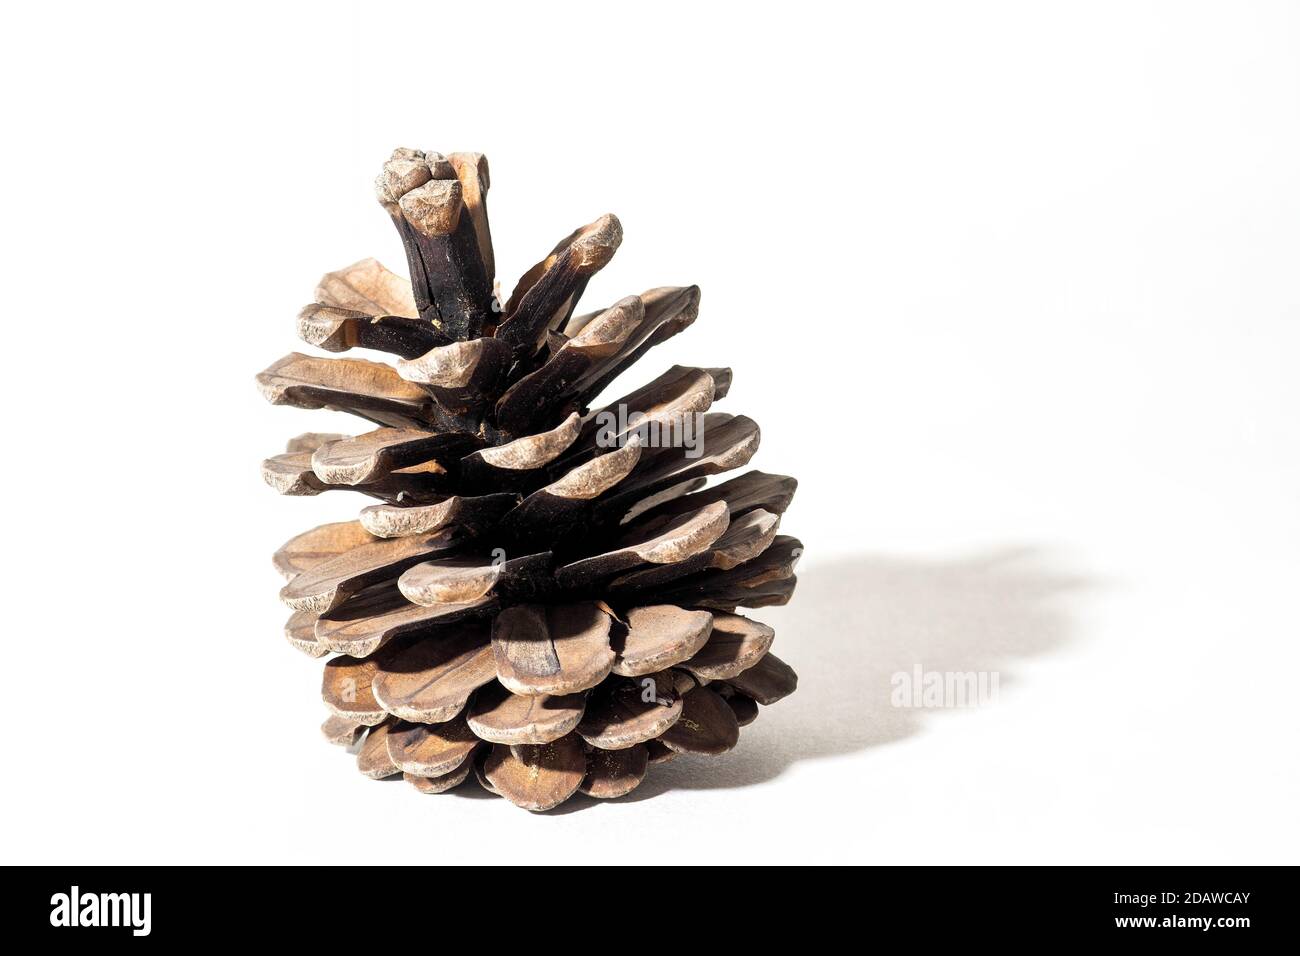 One conifer cone on white background, selective focus. Stock Photo